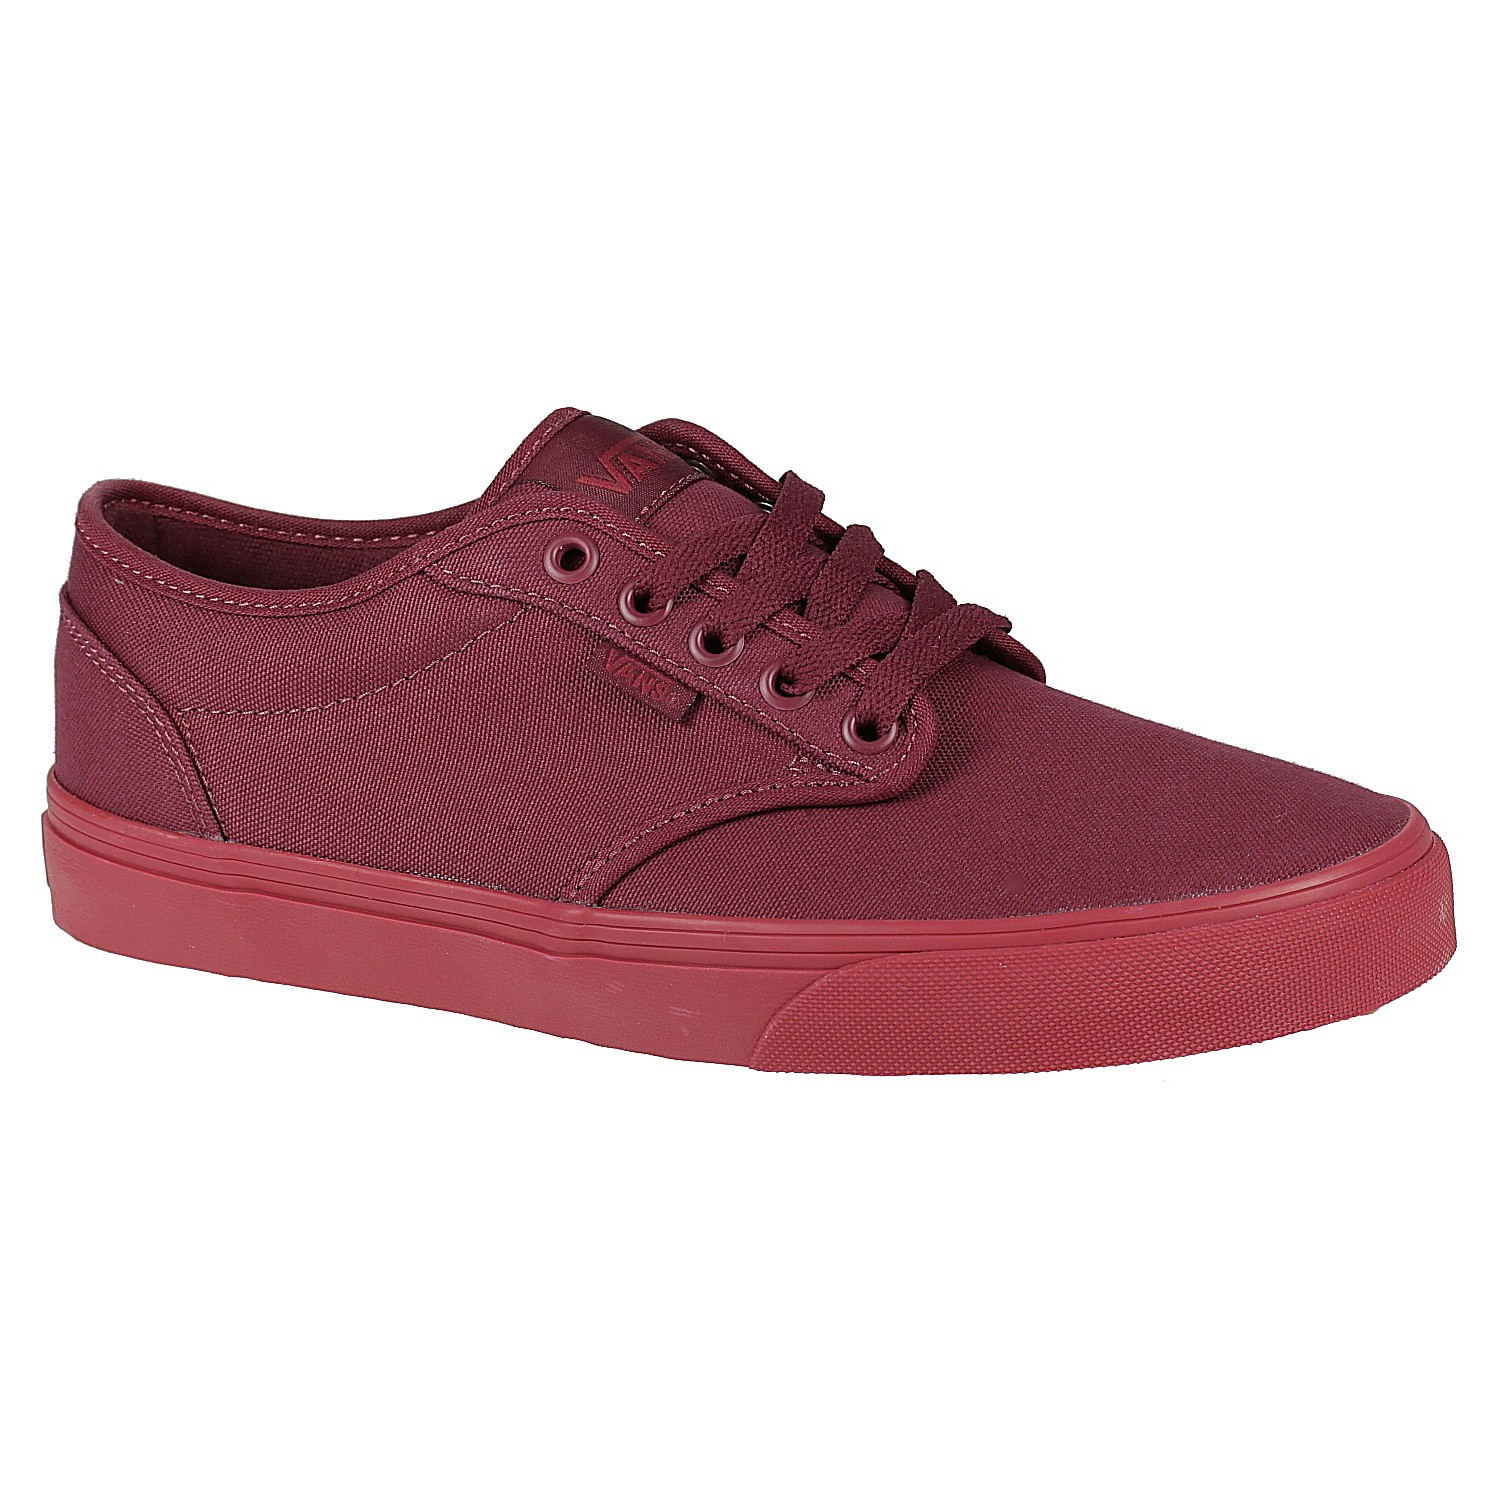 Vans Atwood check liner burgundy/red 